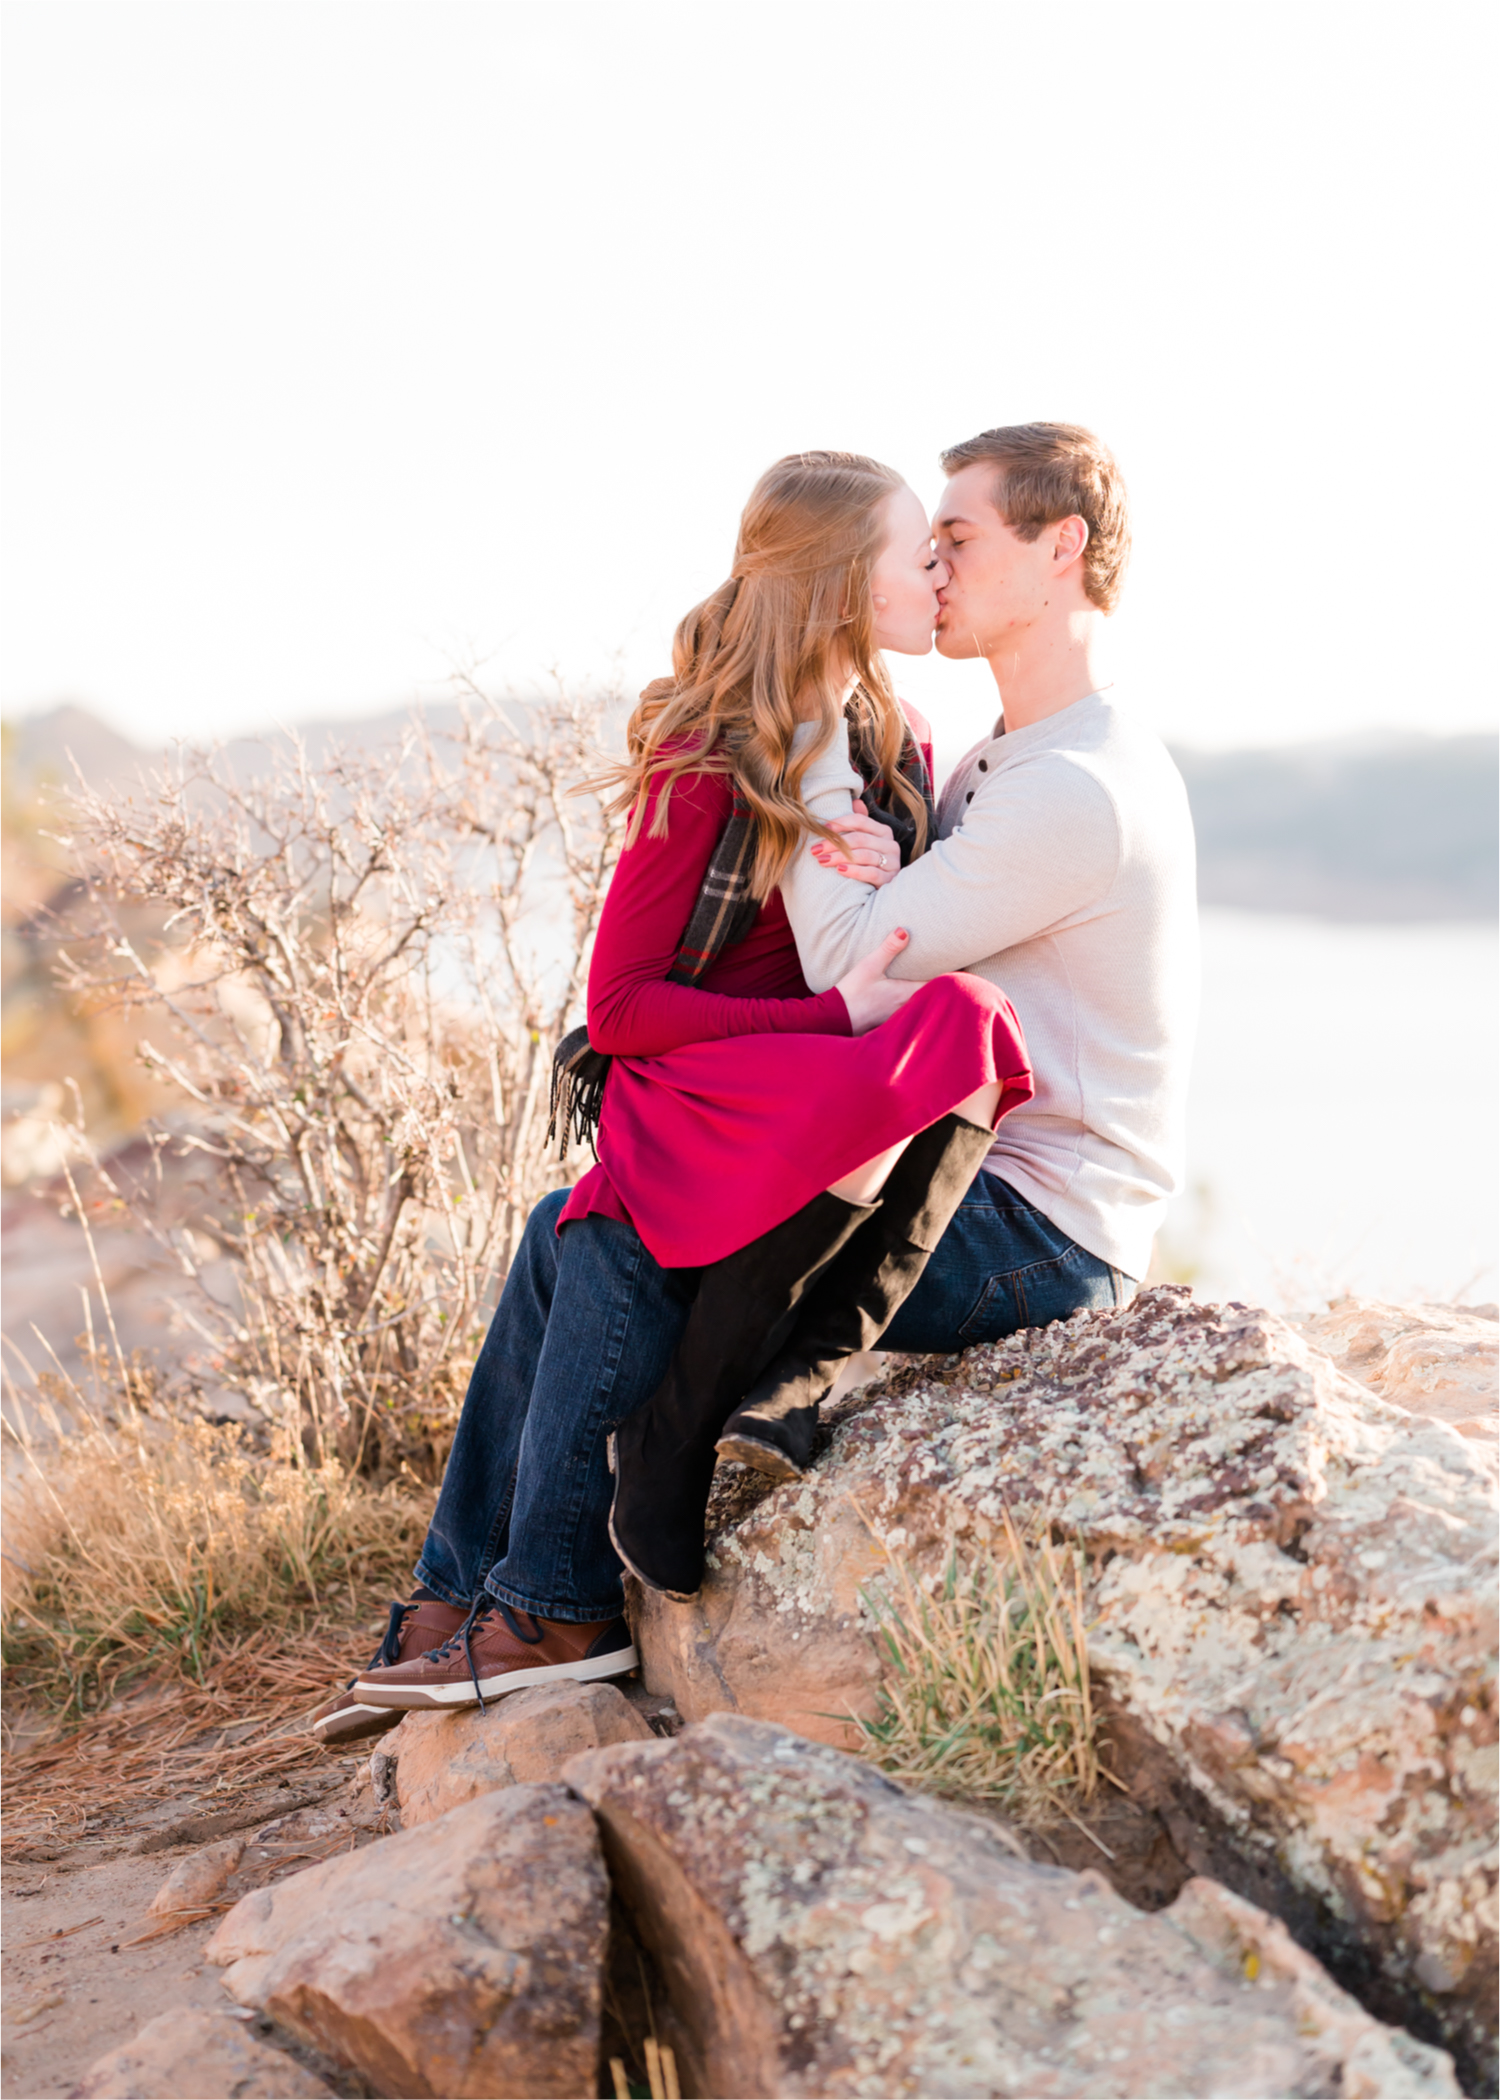 Winter Horsetooth Reservoir Engagement | Colorado Wedding Photographer and Videographer | Britni Girard Photography | Wedding and Engagement Films | Dancing, Cuddles, Chilly weather for this Rocky Mountain Engagement in Fort Collins